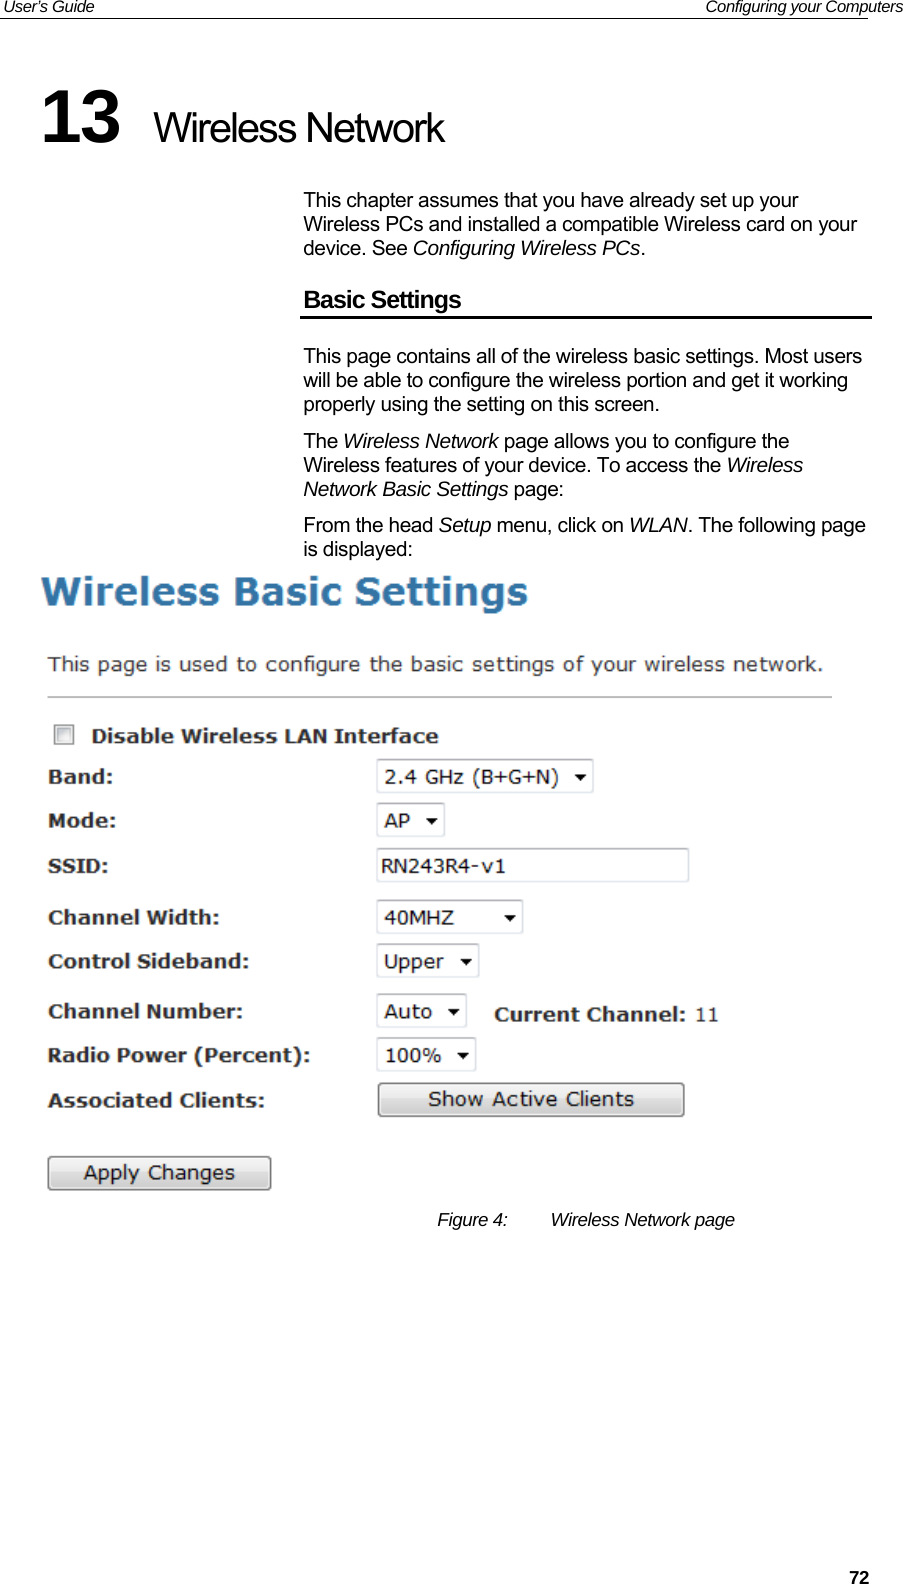 User’s Guide   Configuring your Computers 13  Wireless Network This chapter assumes that you have already set up your Wireless PCs and installed a compatible Wireless card on your device. See Configuring Wireless PCs. Basic Settings This page contains all of the wireless basic settings. Most users will be able to configure the wireless portion and get it working properly using the setting on this screen. The Wireless Network page allows you to configure the Wireless features of your device. To access the Wireless Network Basic Settings page: From the head Setup menu, click on WLAN. The following page is displayed:  Figure 4:  Wireless Network page          72